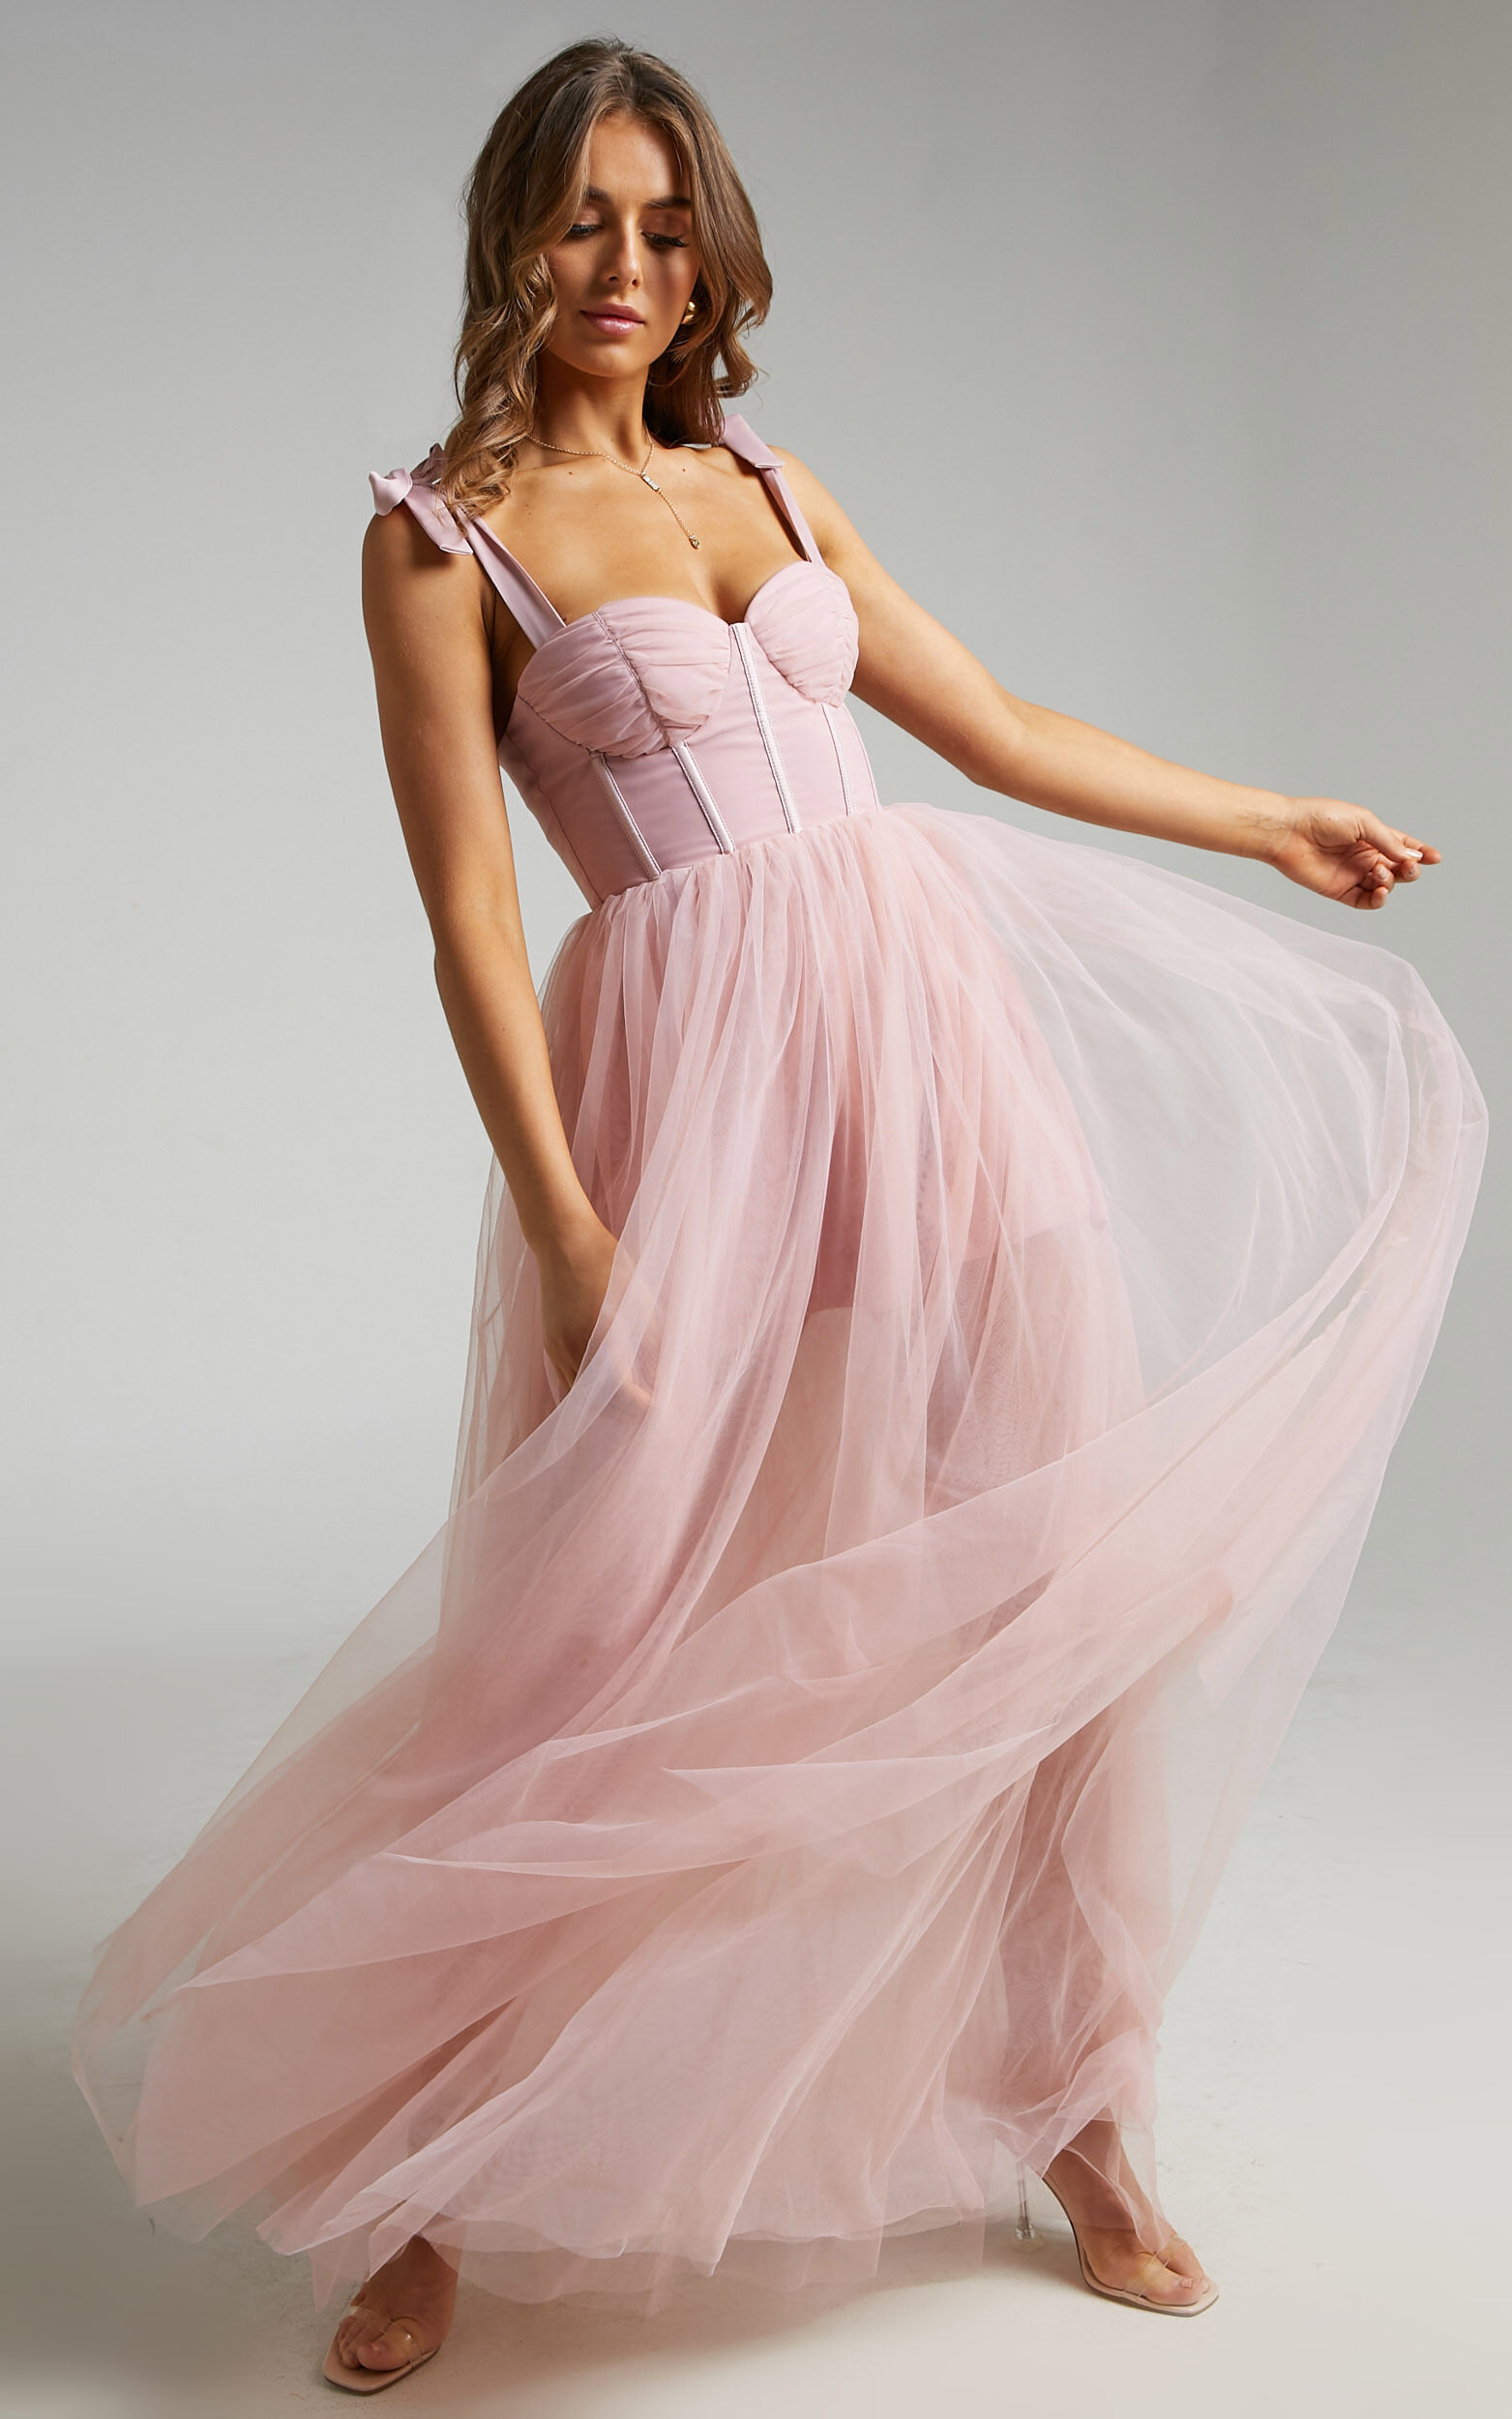 Tulle-trimmed ruched bustier gown in pink - David Koma